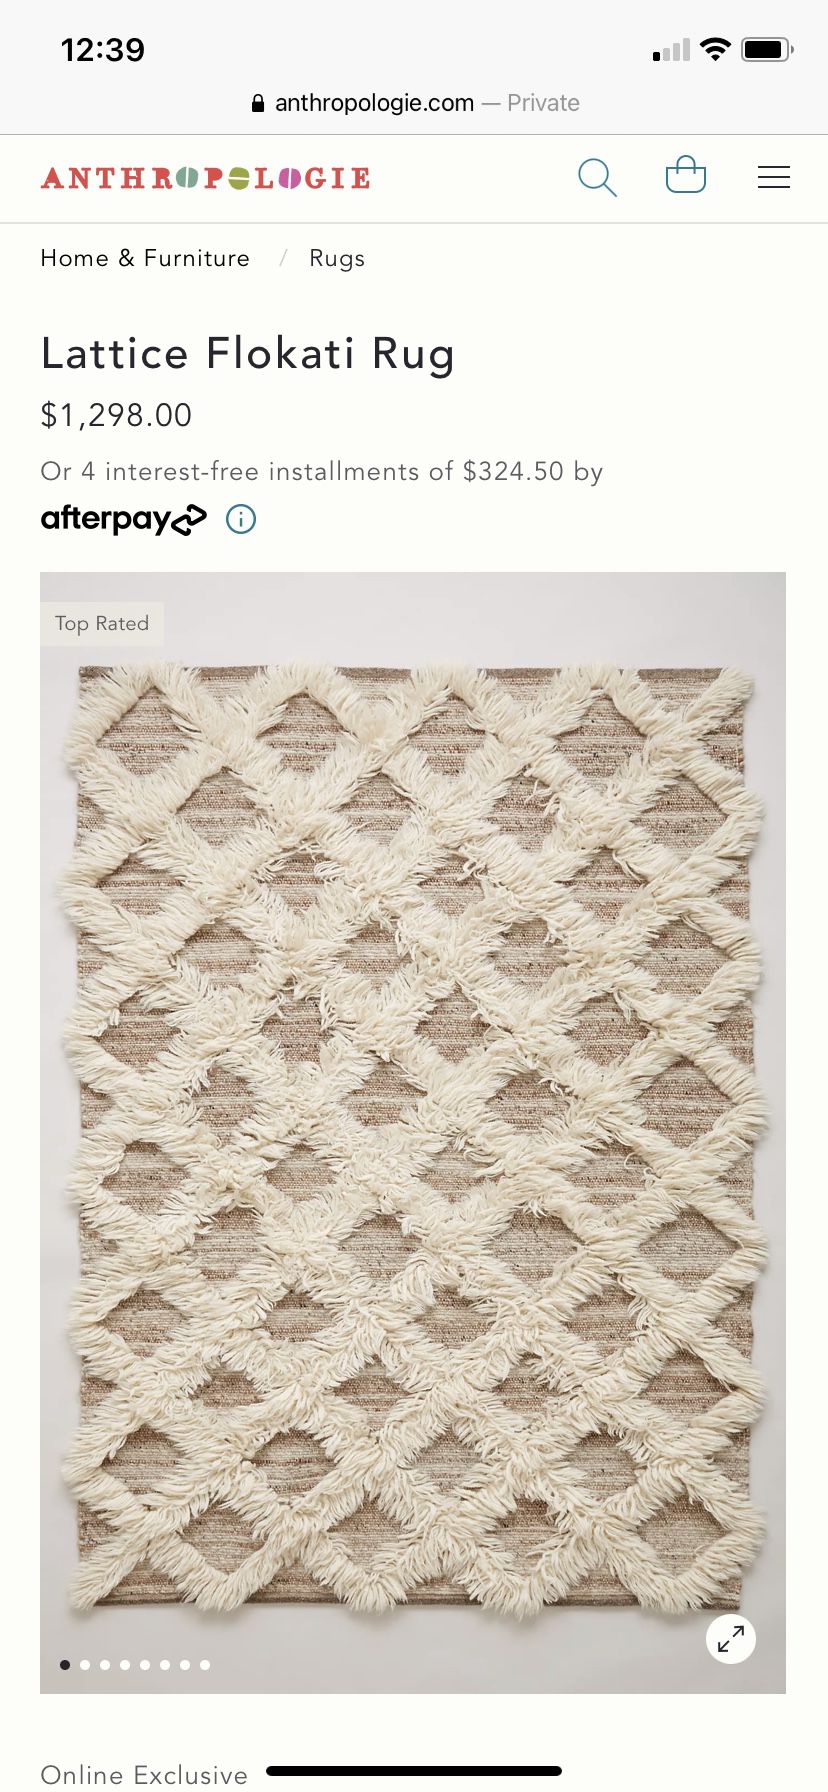 Selling Anthropology Beautiful 11x9ft Rug